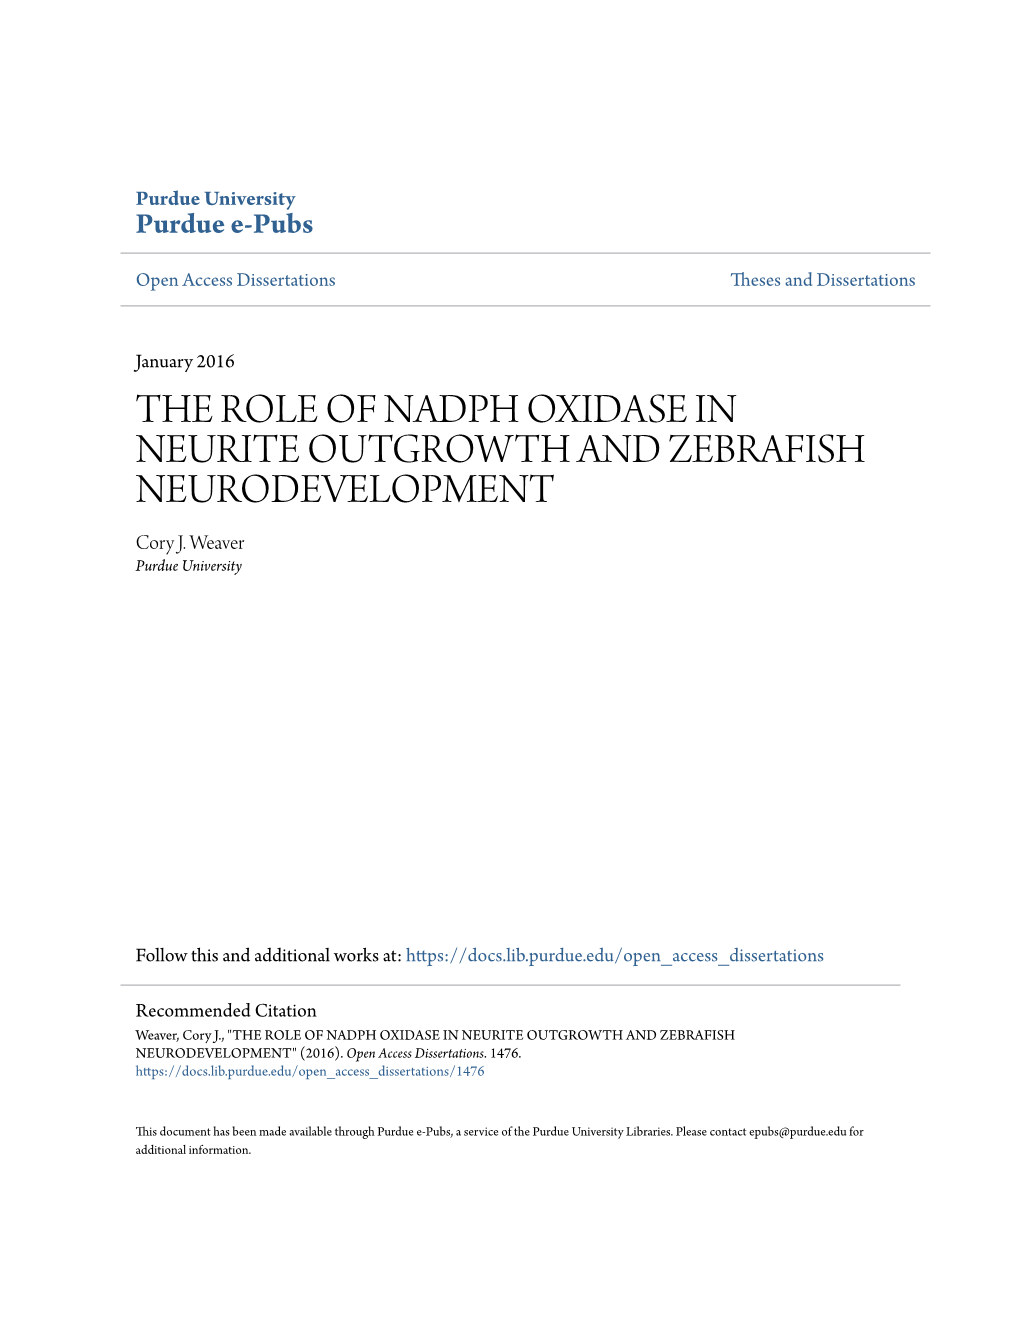 THE ROLE of NADPH OXIDASE in NEURITE OUTGROWTH and ZEBRAFISH NEURODEVELOPMENT Cory J